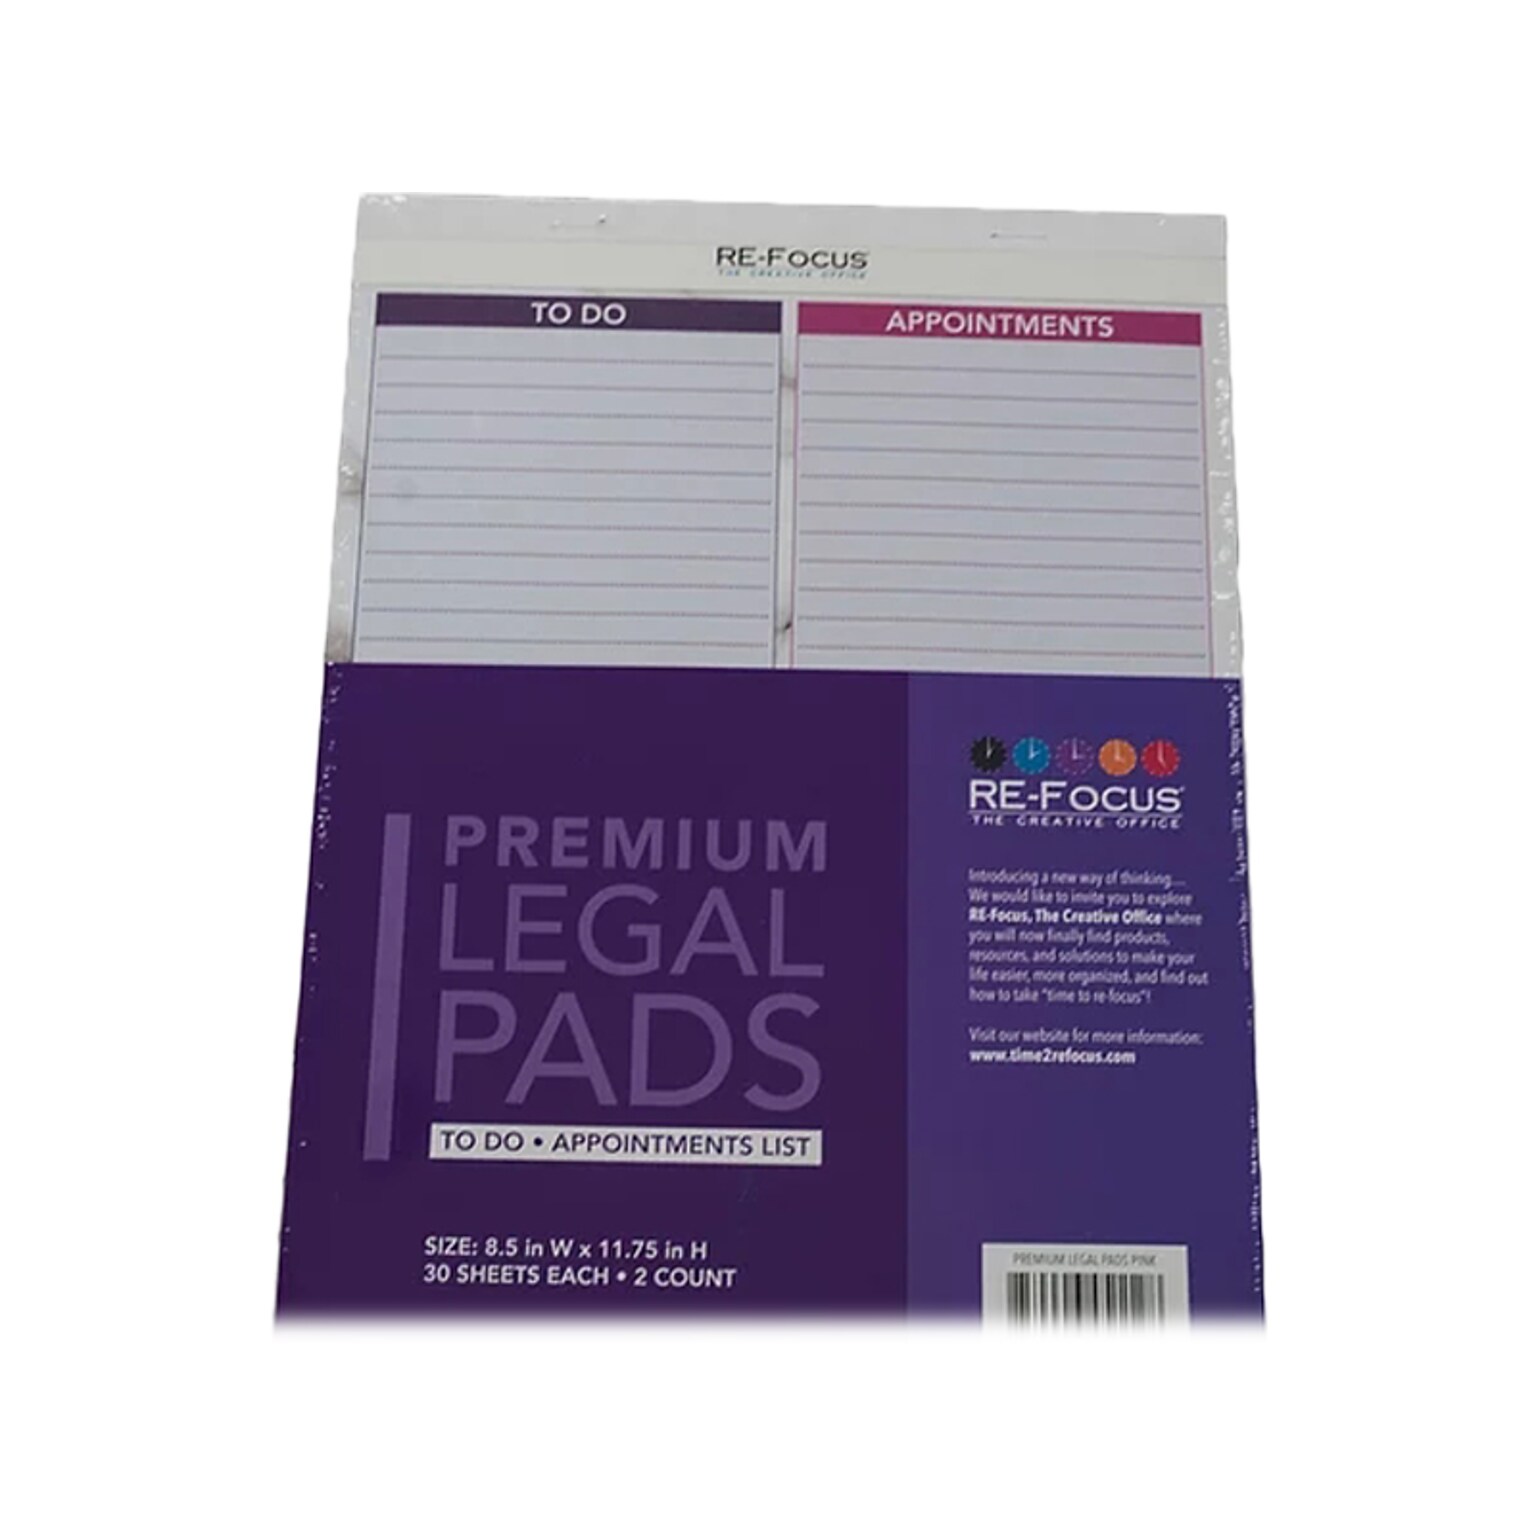 RE-FOCUS THE CREATIVE OFFICE Premium Legal Pad, Ruled, 8.5 x 11.75, Pink, 30 Sheets/Pad, 2 Pads (40002)